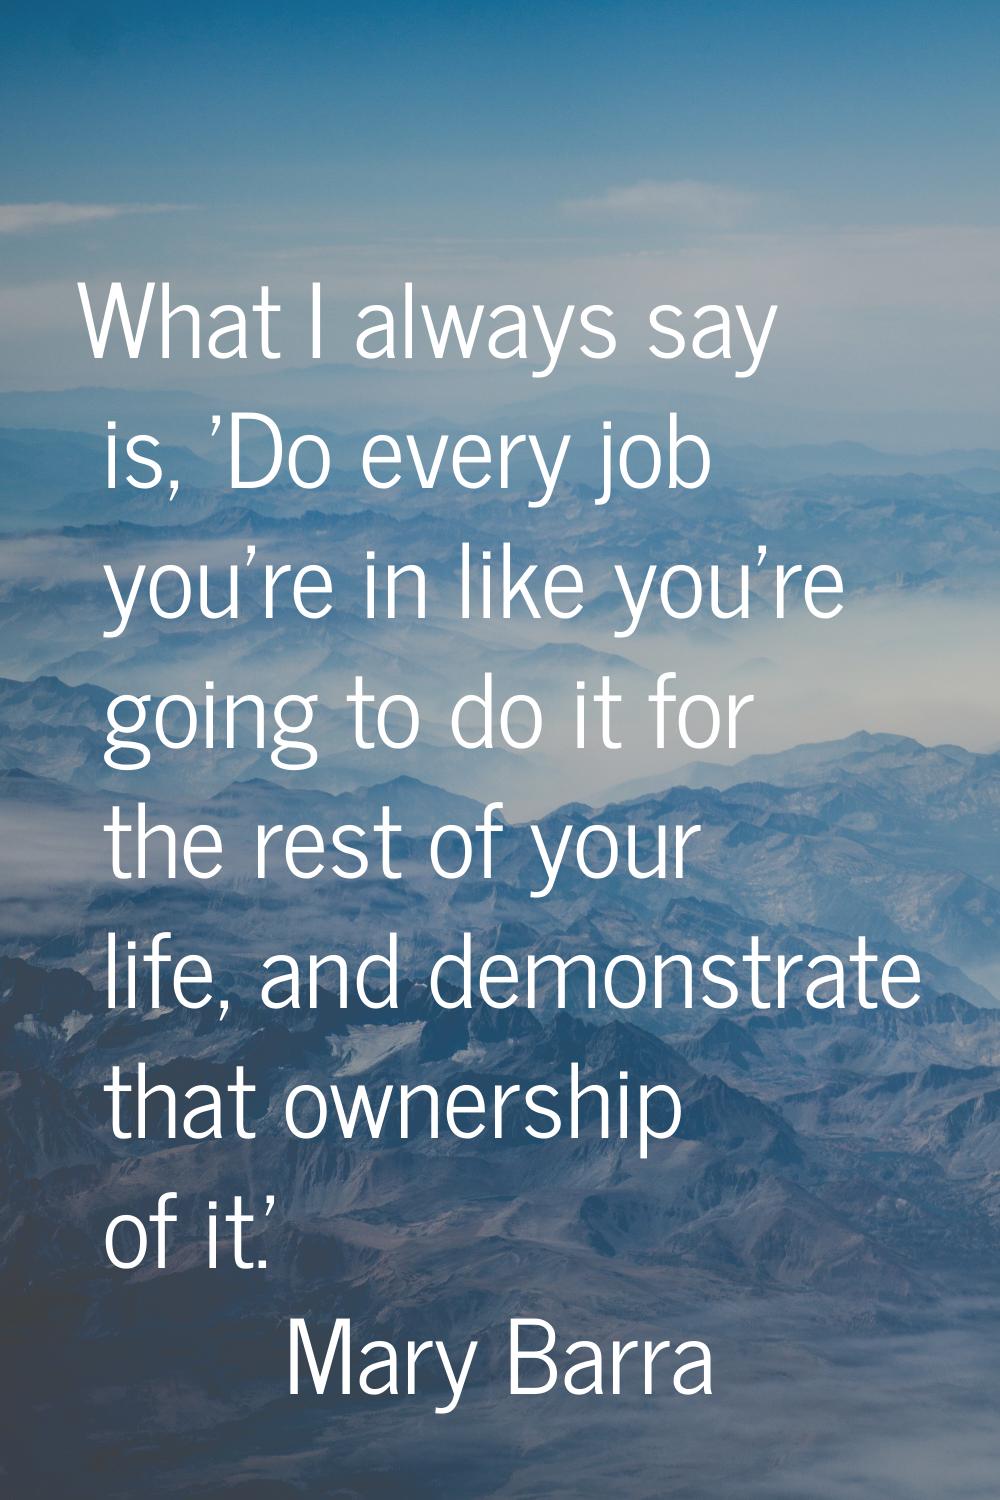 What I always say is, 'Do every job you're in like you're going to do it for the rest of your life,